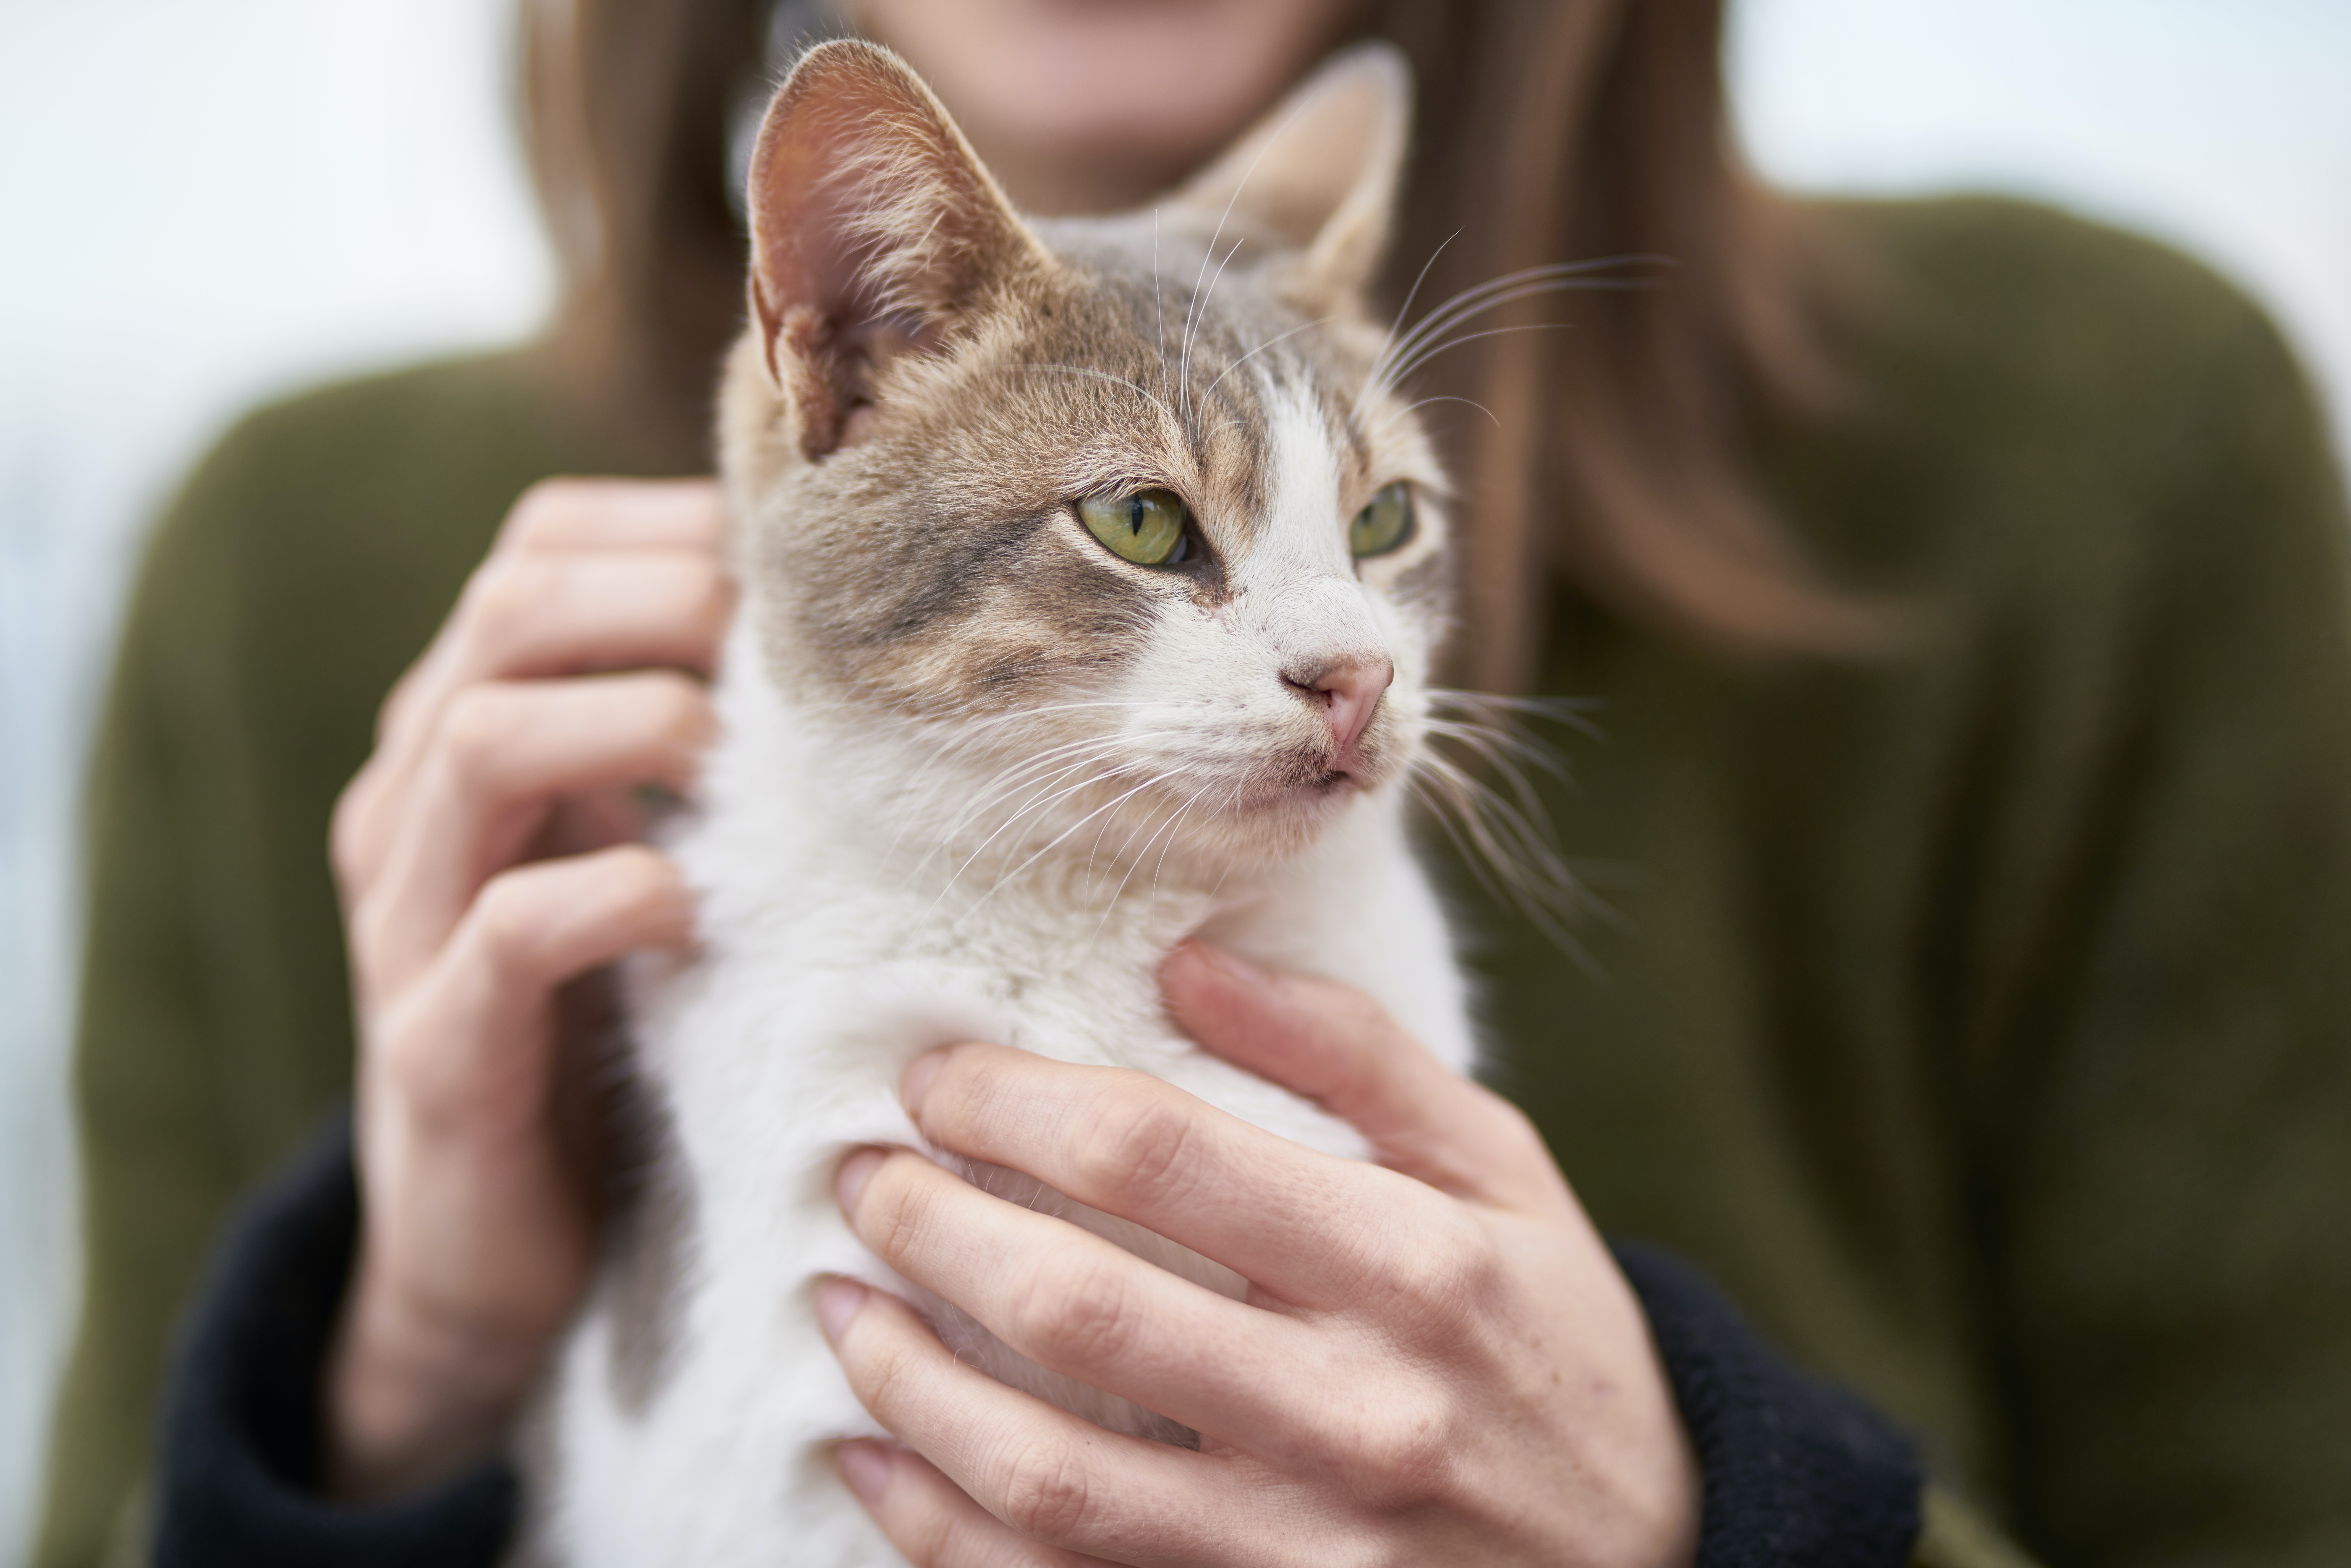 Tigers can get coronavirus—but you won’t catch COVID-19 from your cat